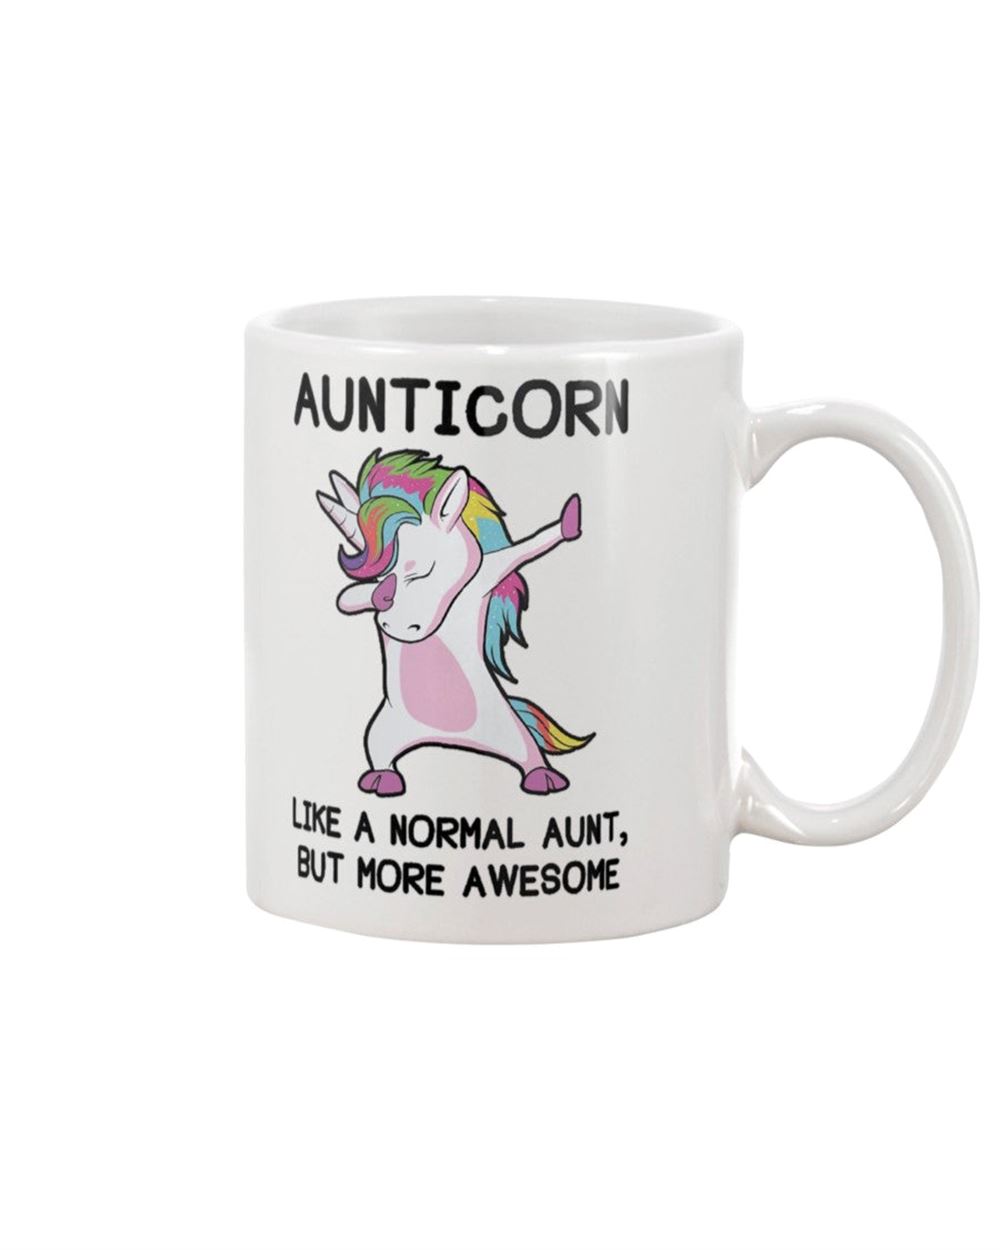 Aunticorn Like A Normal Aunt But More Awesome Mug New